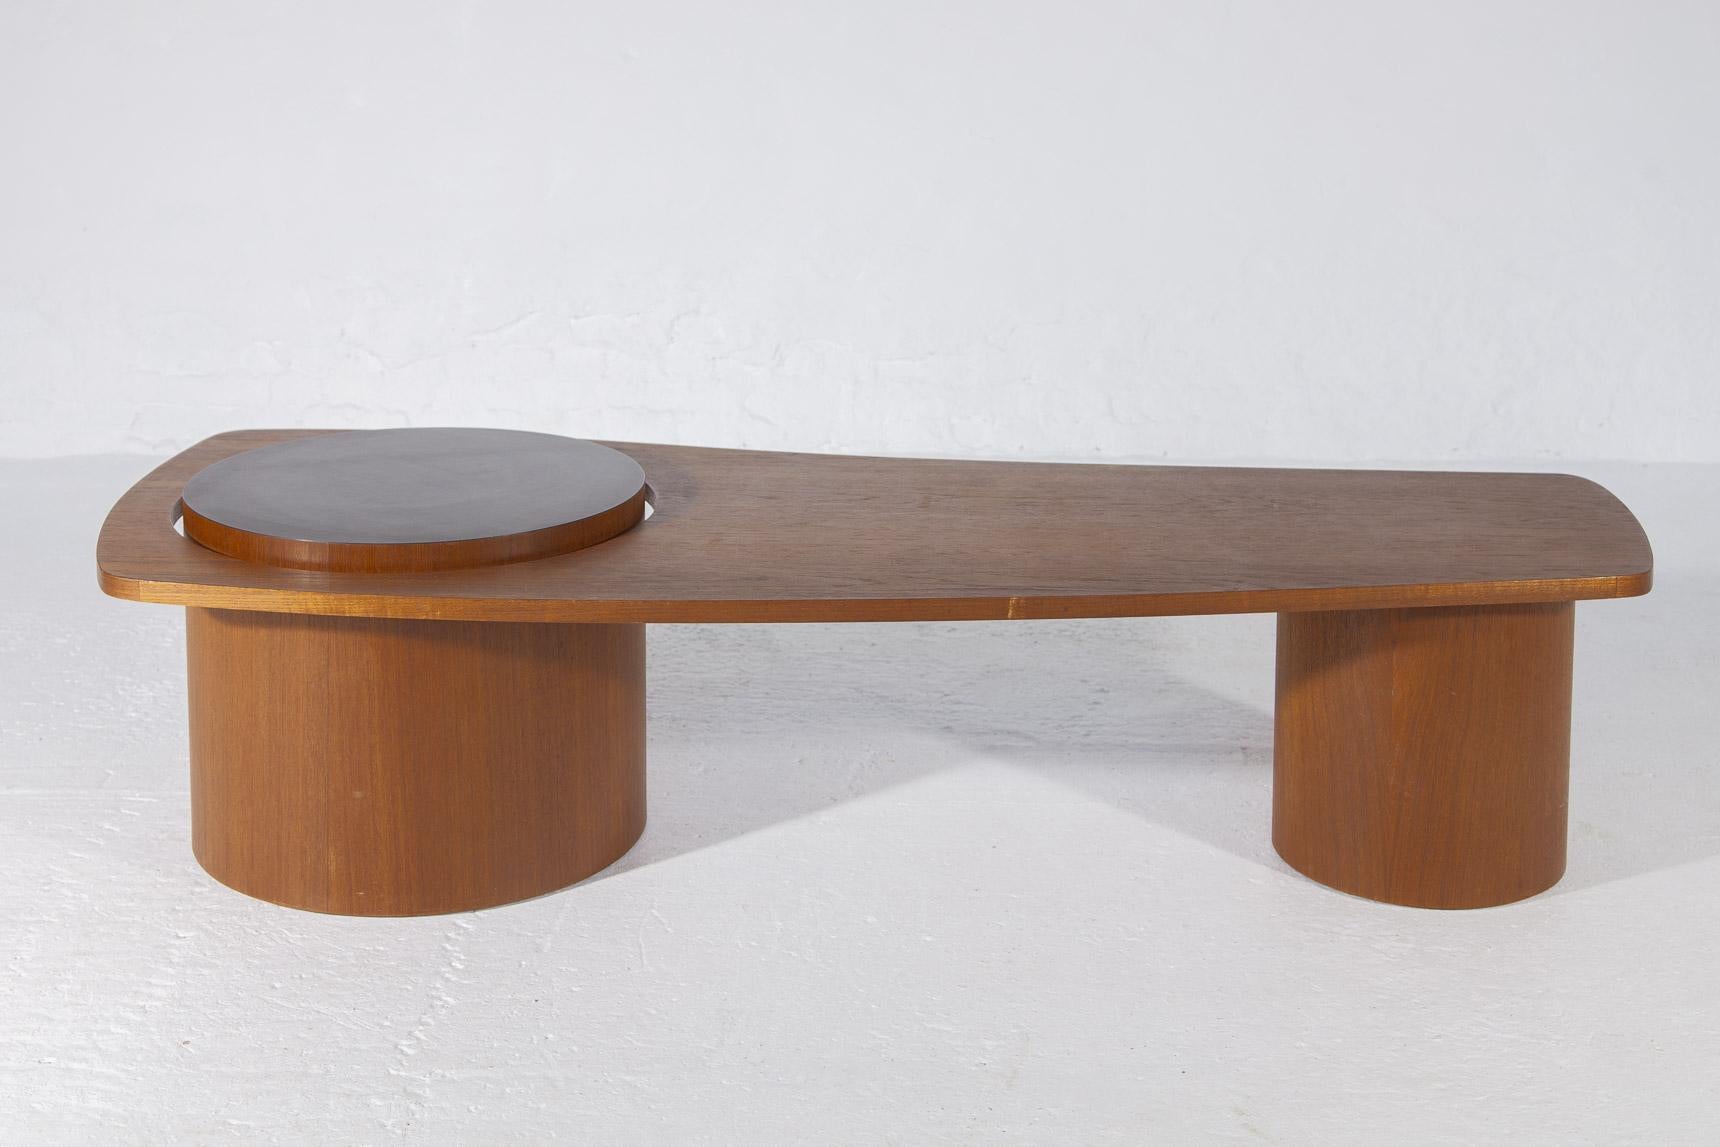 Hand-Crafted Mid Century Modern Kidney Shaped Teak Coffee Table 1960s.